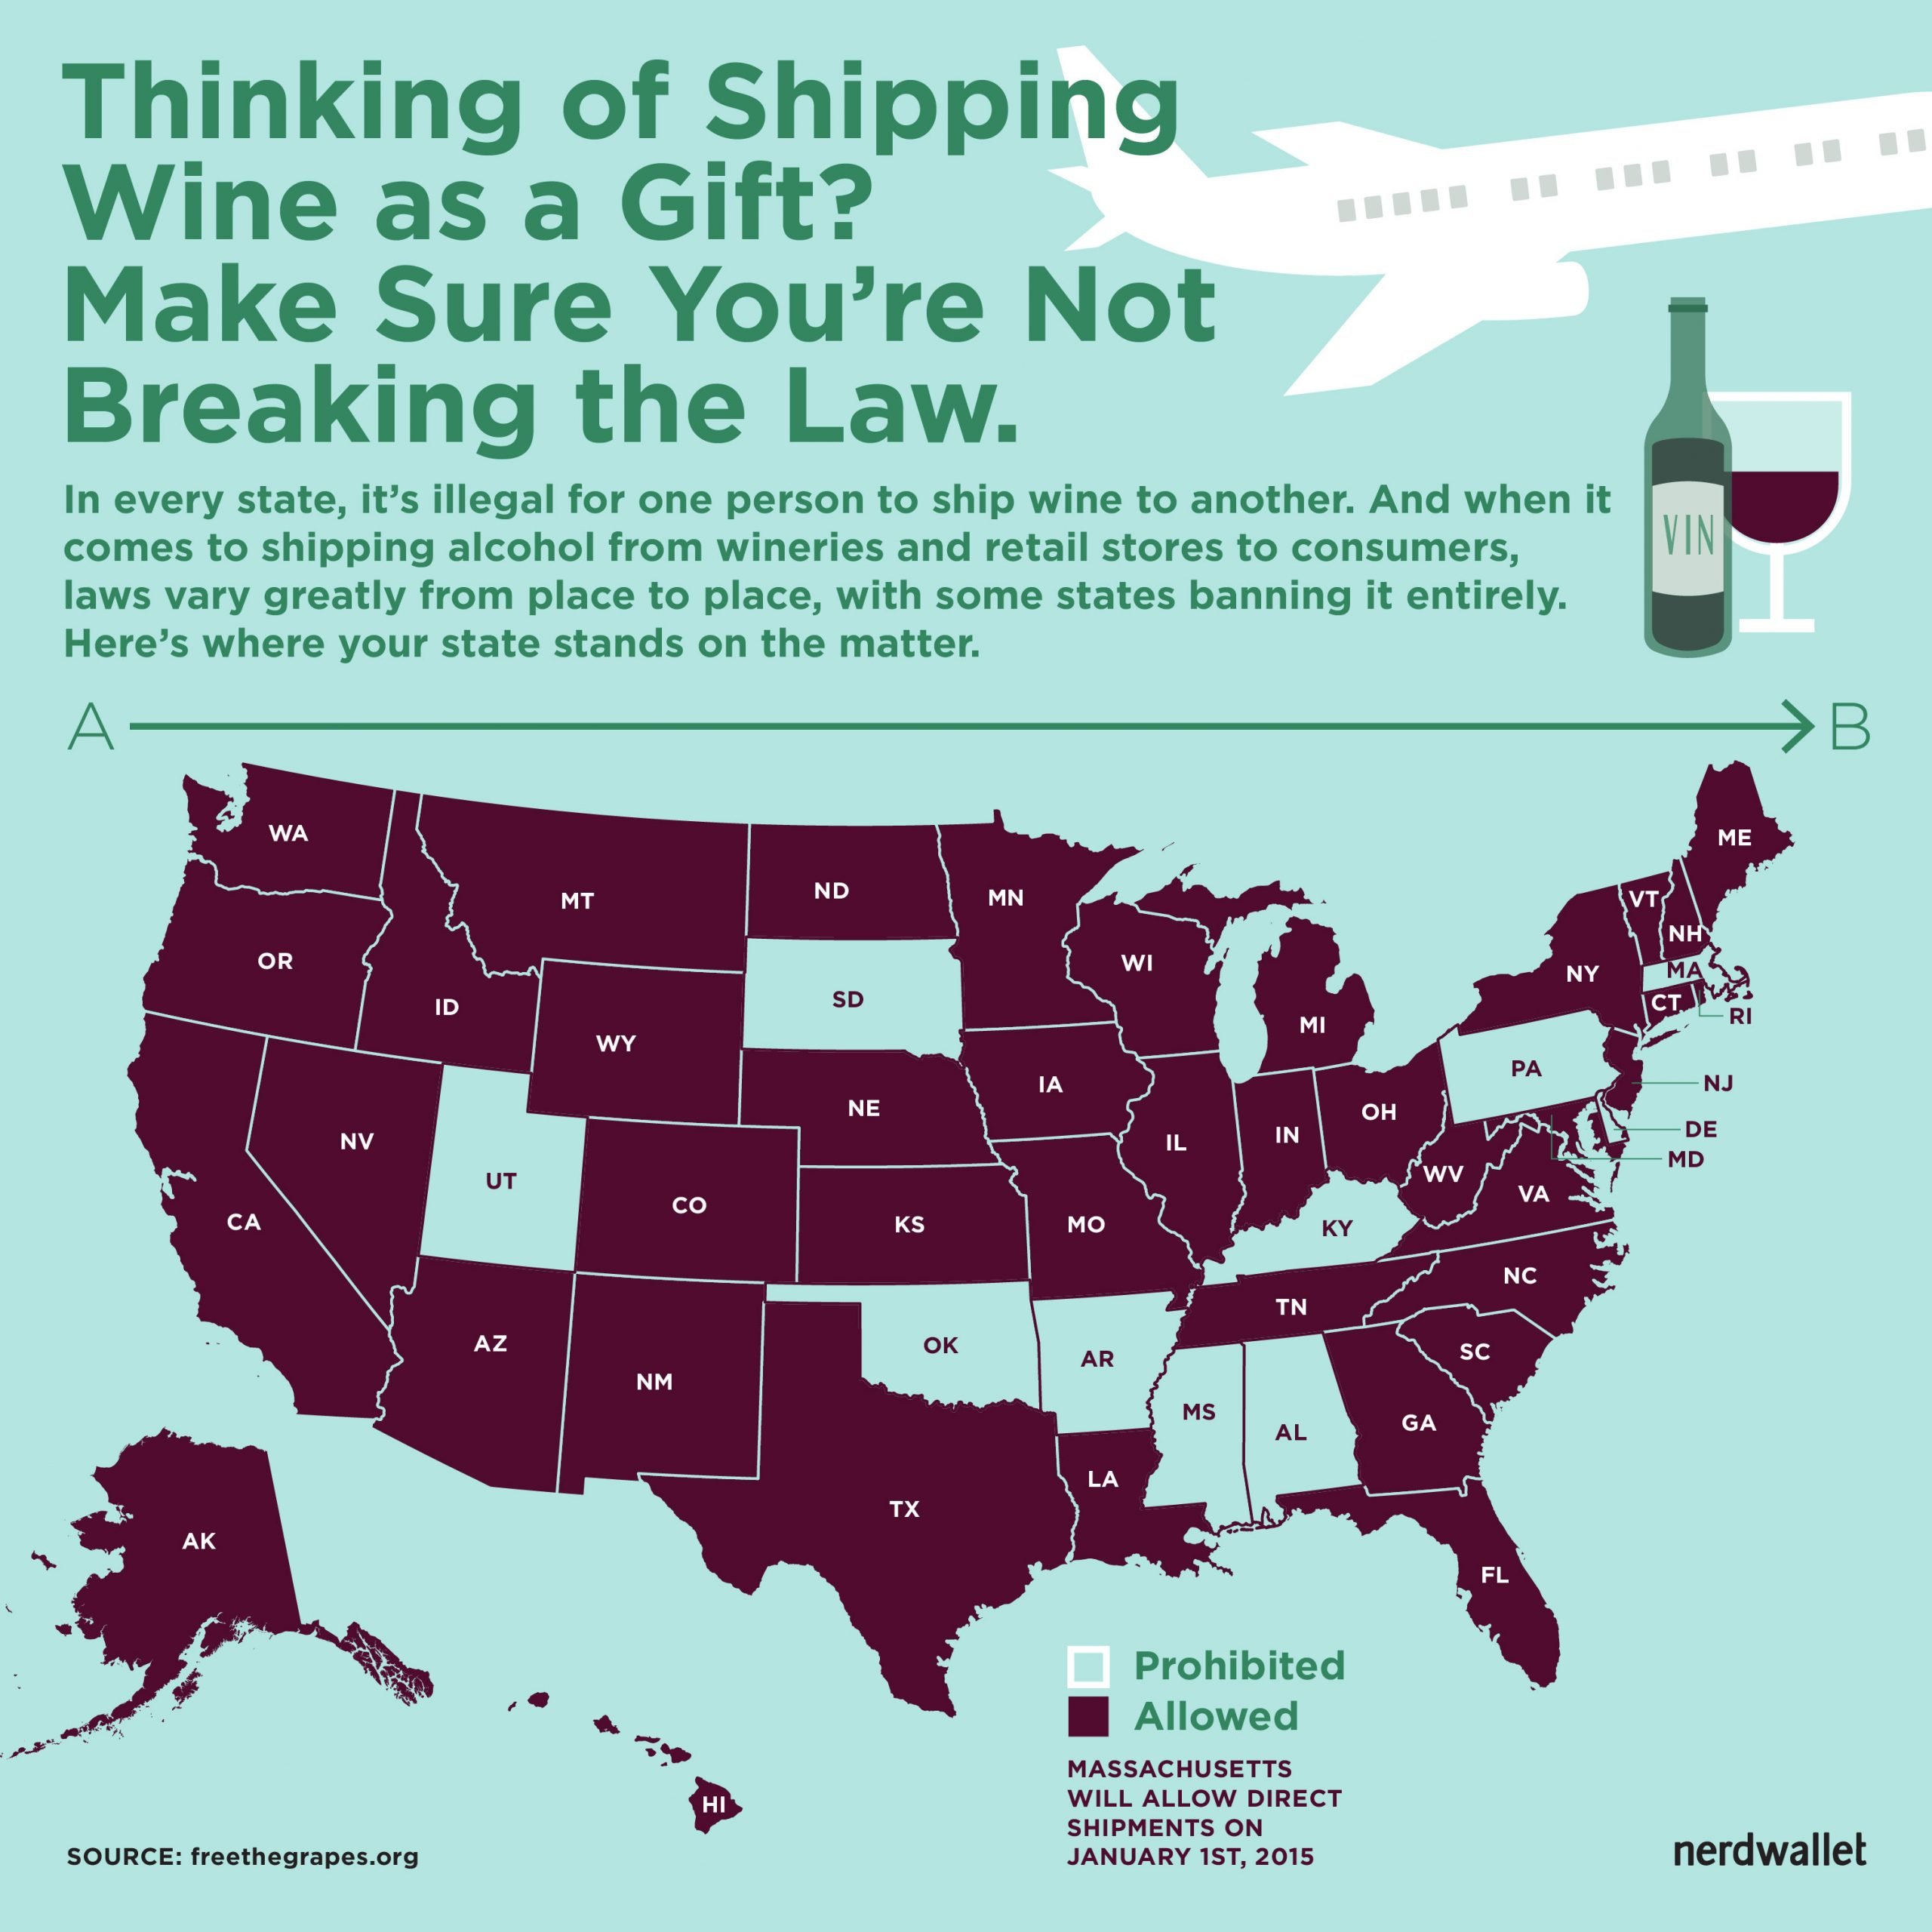 Ship Wine as a Gift Without Breaking the Law